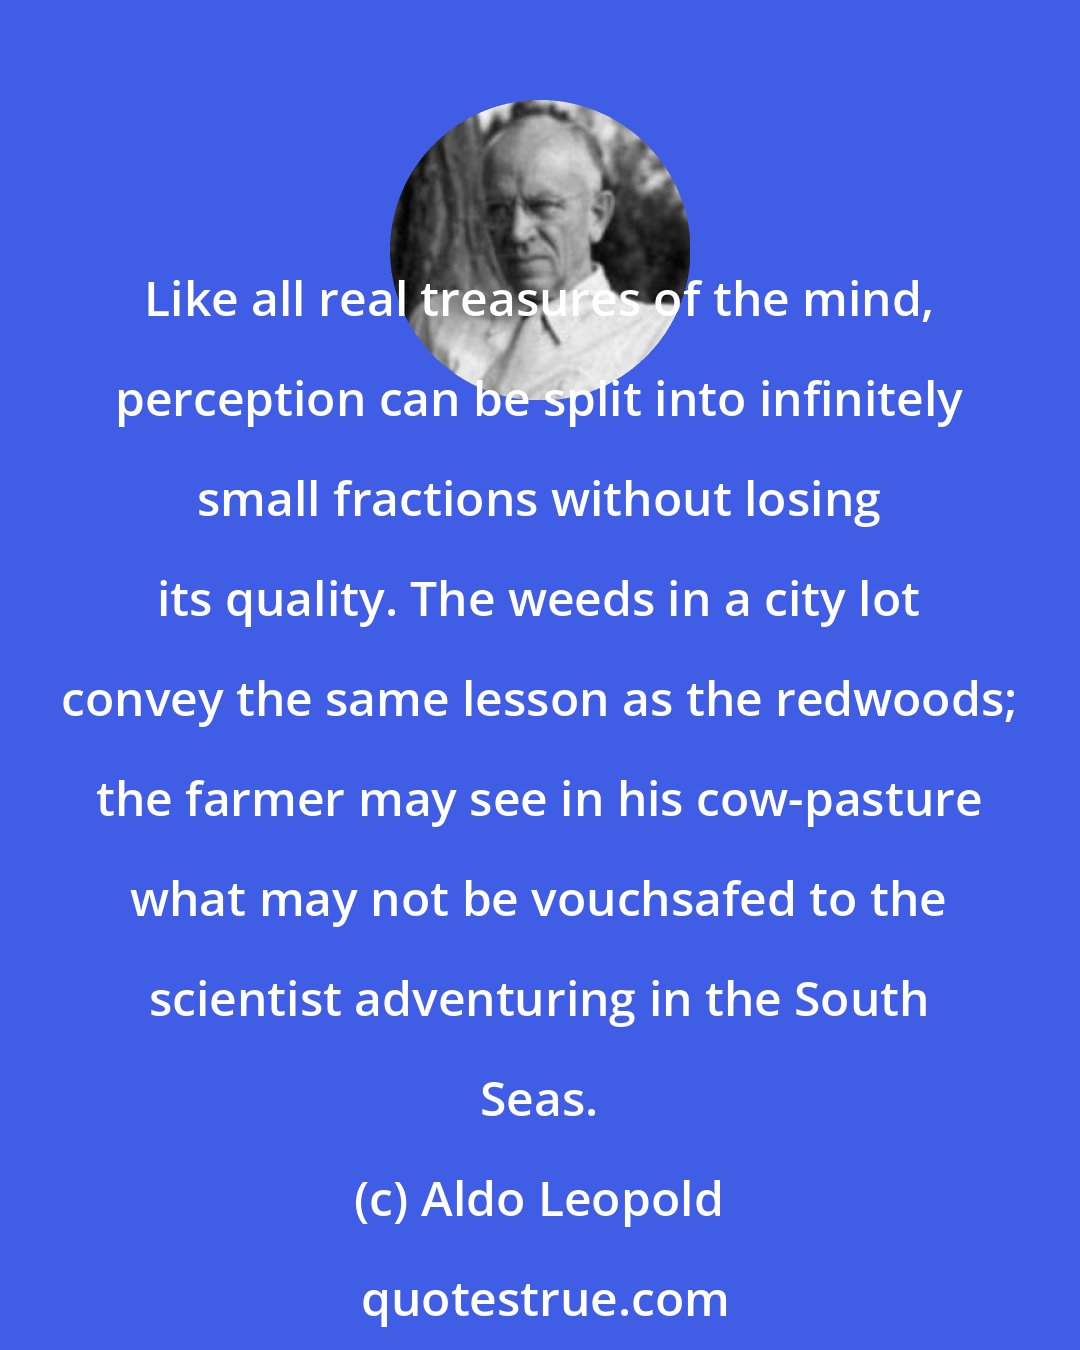 Aldo Leopold: Like all real treasures of the mind, perception can be split into infinitely small fractions without losing its quality. The weeds in a city lot convey the same lesson as the redwoods; the farmer may see in his cow-pasture what may not be vouchsafed to the scientist adventuring in the South Seas.